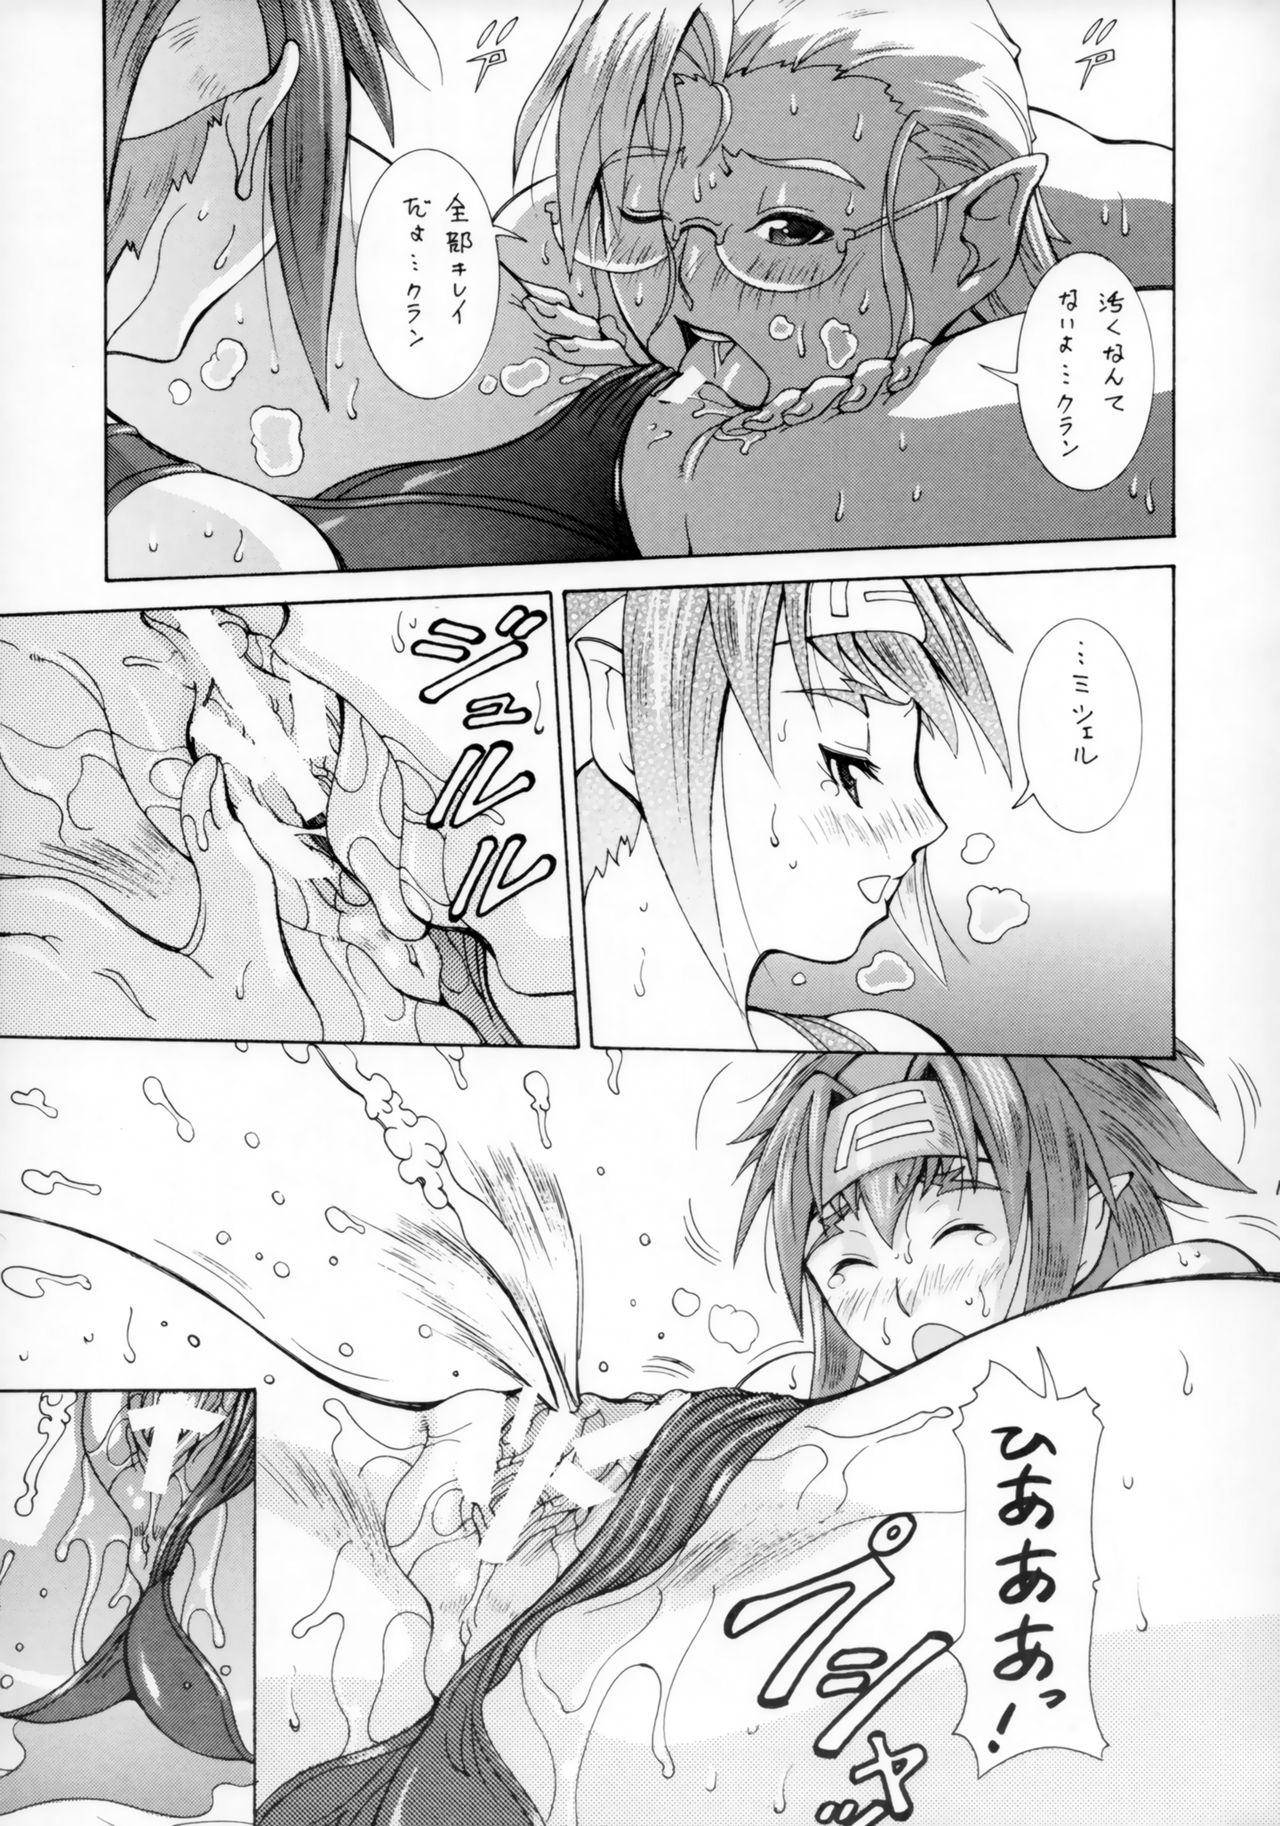 Ikillitts 2008 Fuyu no Deculture - Macross frontier Gay Cash - Page 10